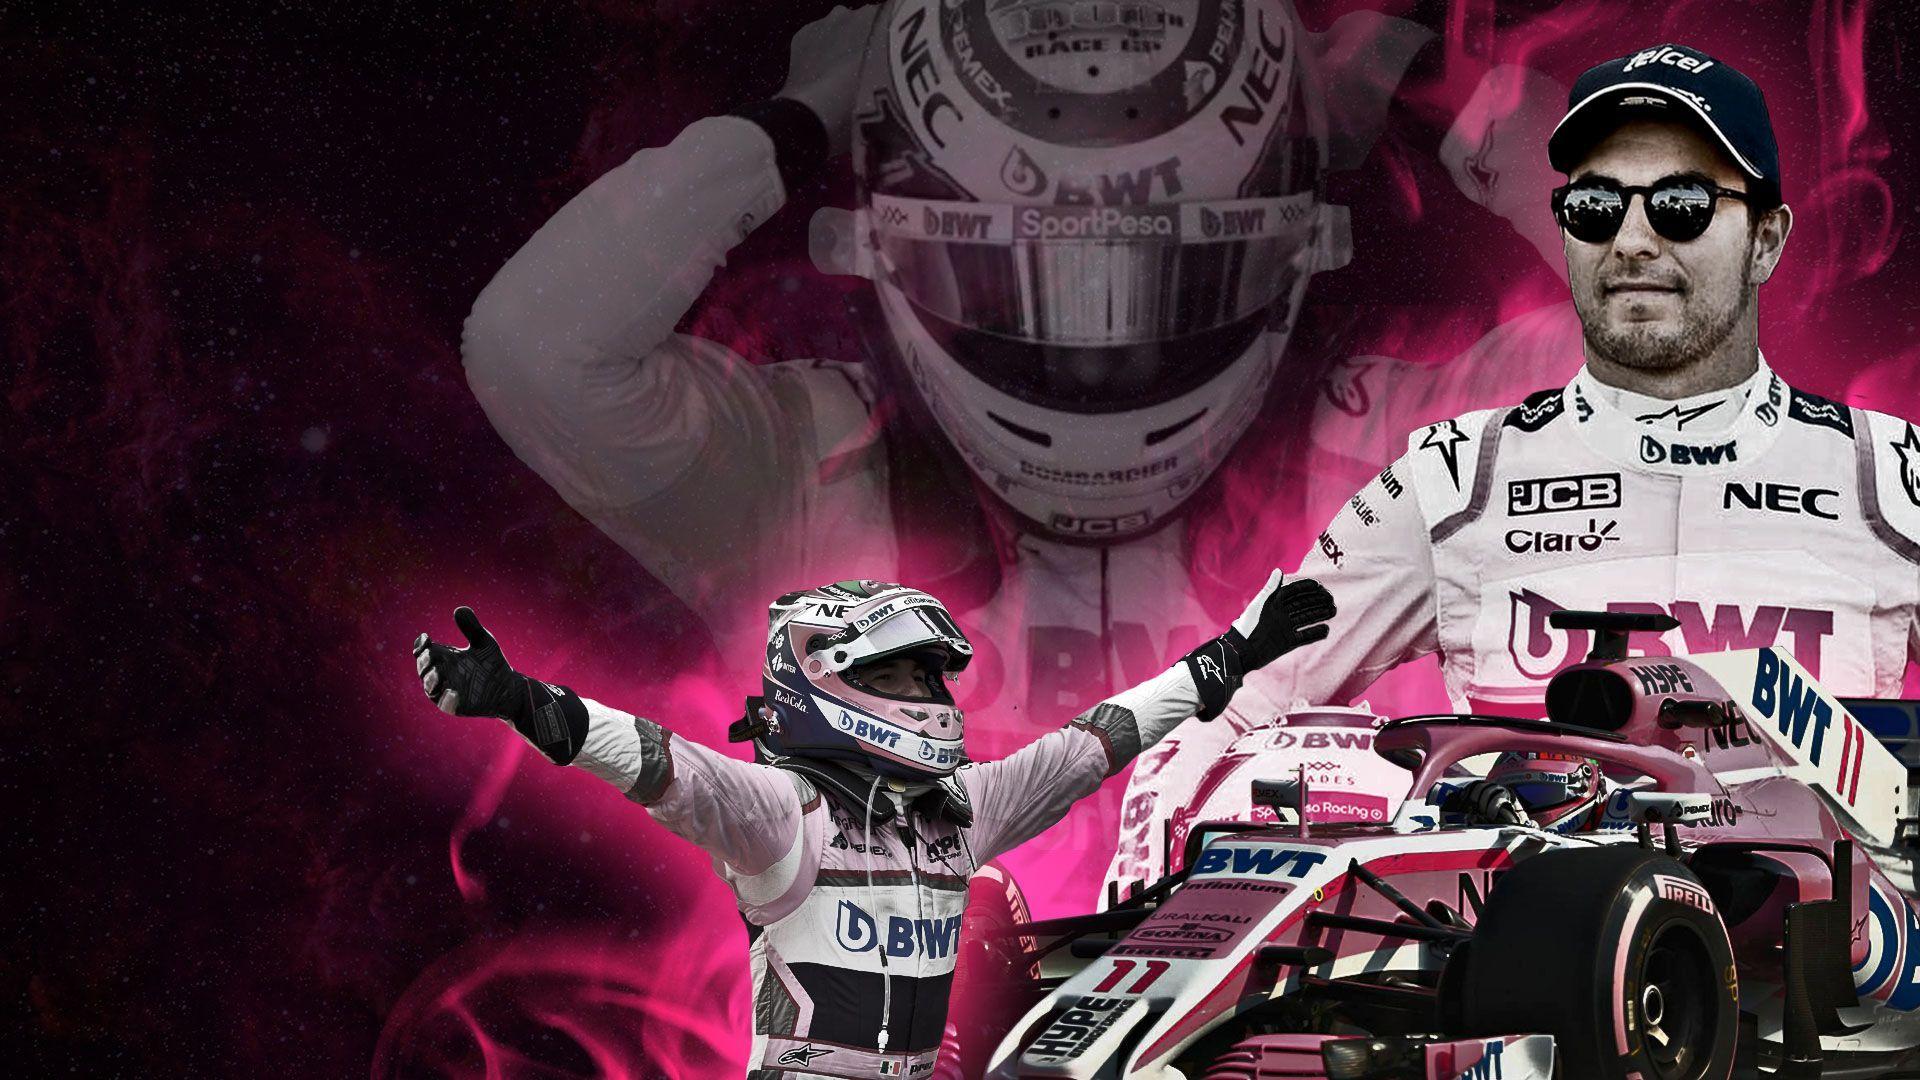 Checo perez wallpaper by Higuera43  Download on ZEDGE  23bc